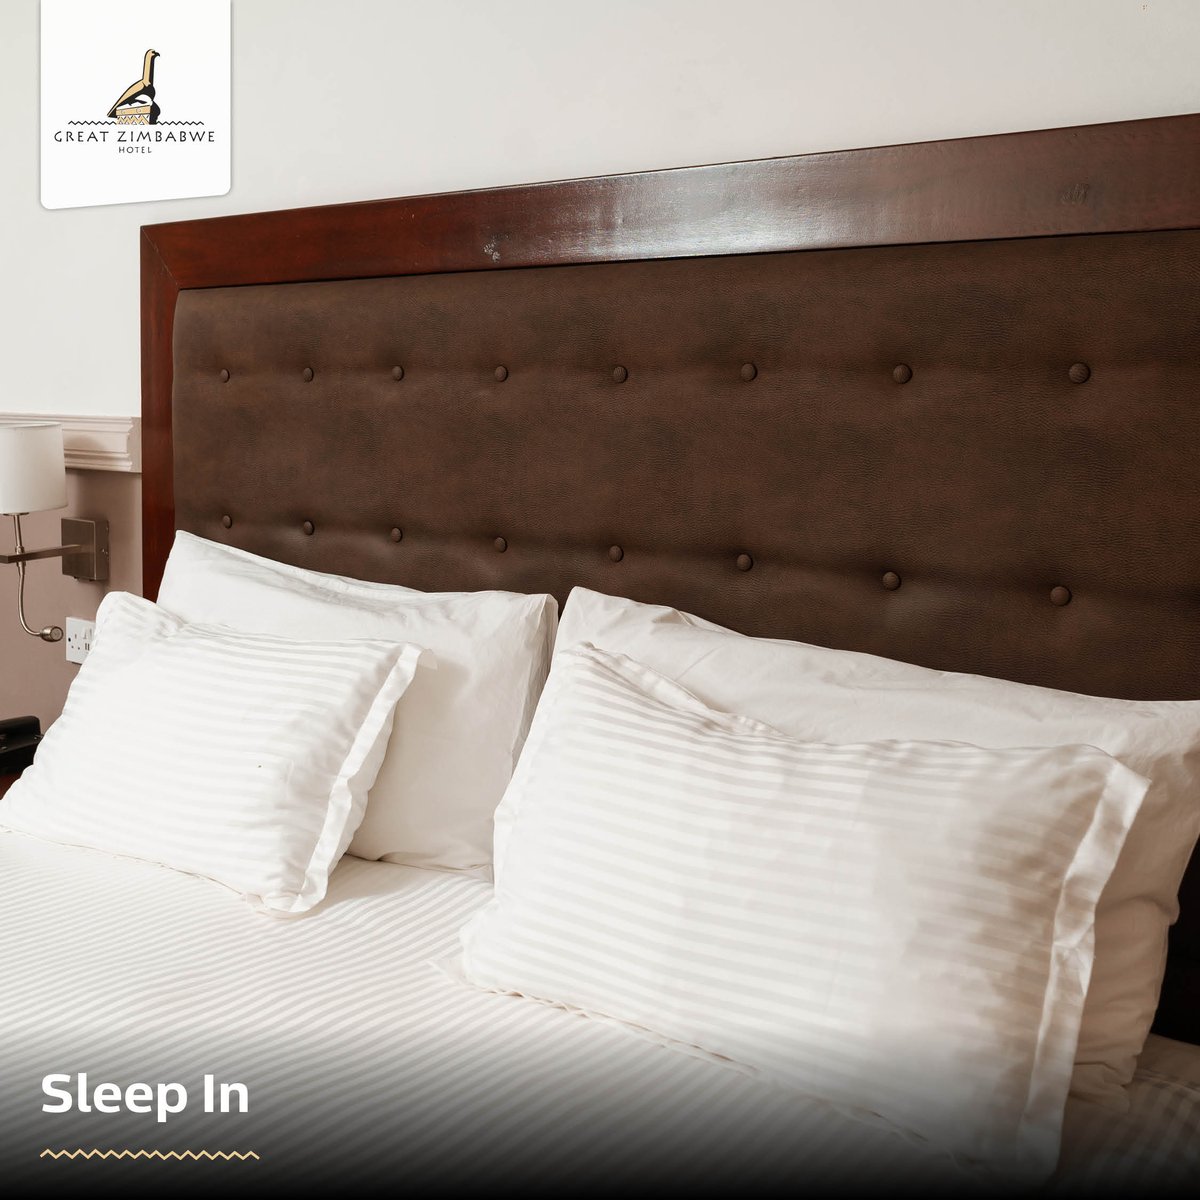 Everything is BEDer on Vacation! ​
Stay with us and peacefully sleep in. ​

Book on: reservations@gzim.africansun.co.zw to make a reservation. ​

#SleepIn #Travel #travelZim #HotelRooms  #Masvingo #GreatZimbabweHotel #ProudlyAfricanSun #ExperienceExploreEnjoy